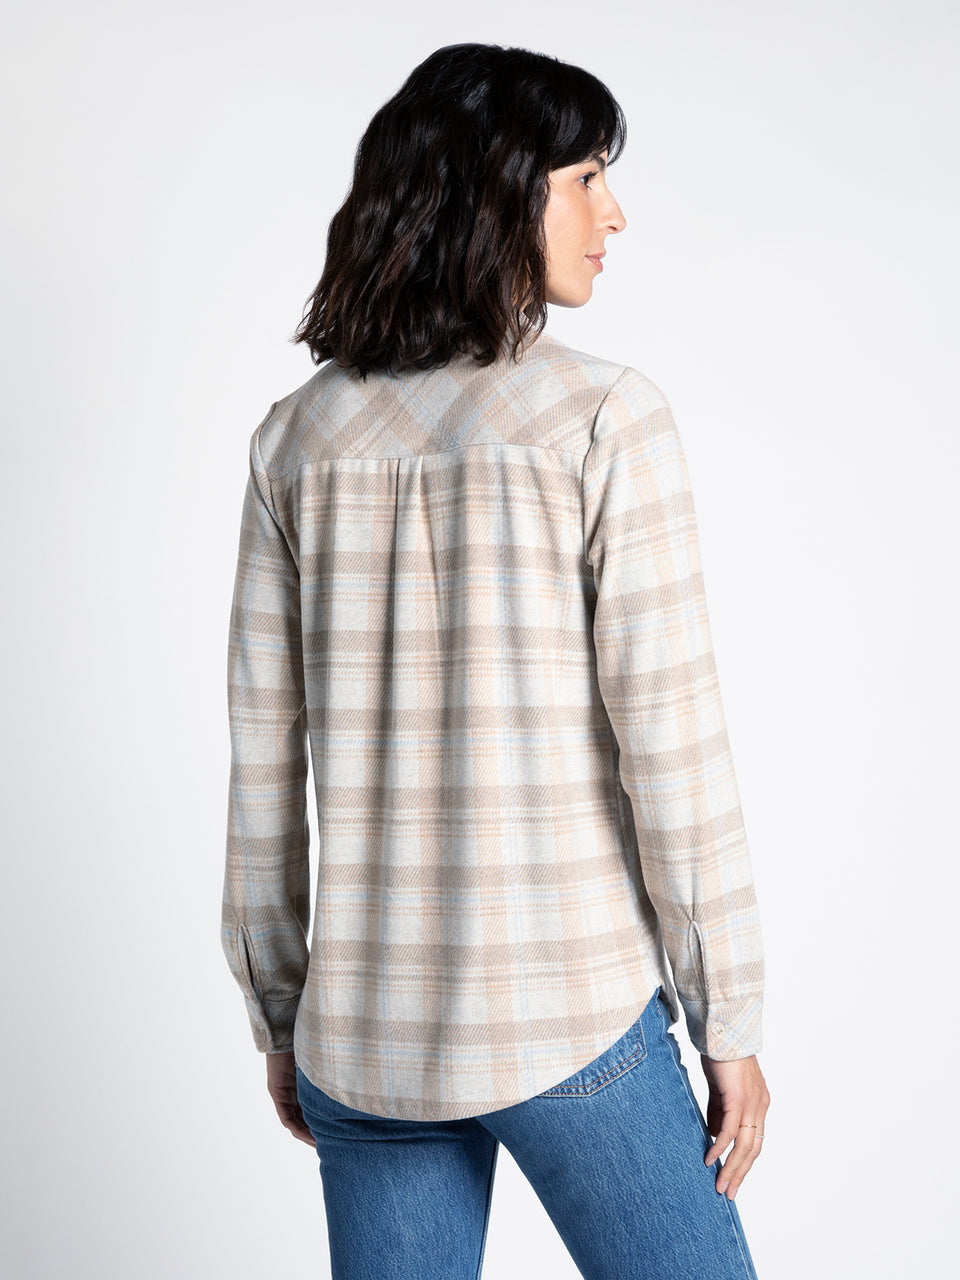 Thread & Supply Beige and Blue Plaid Lewis Top